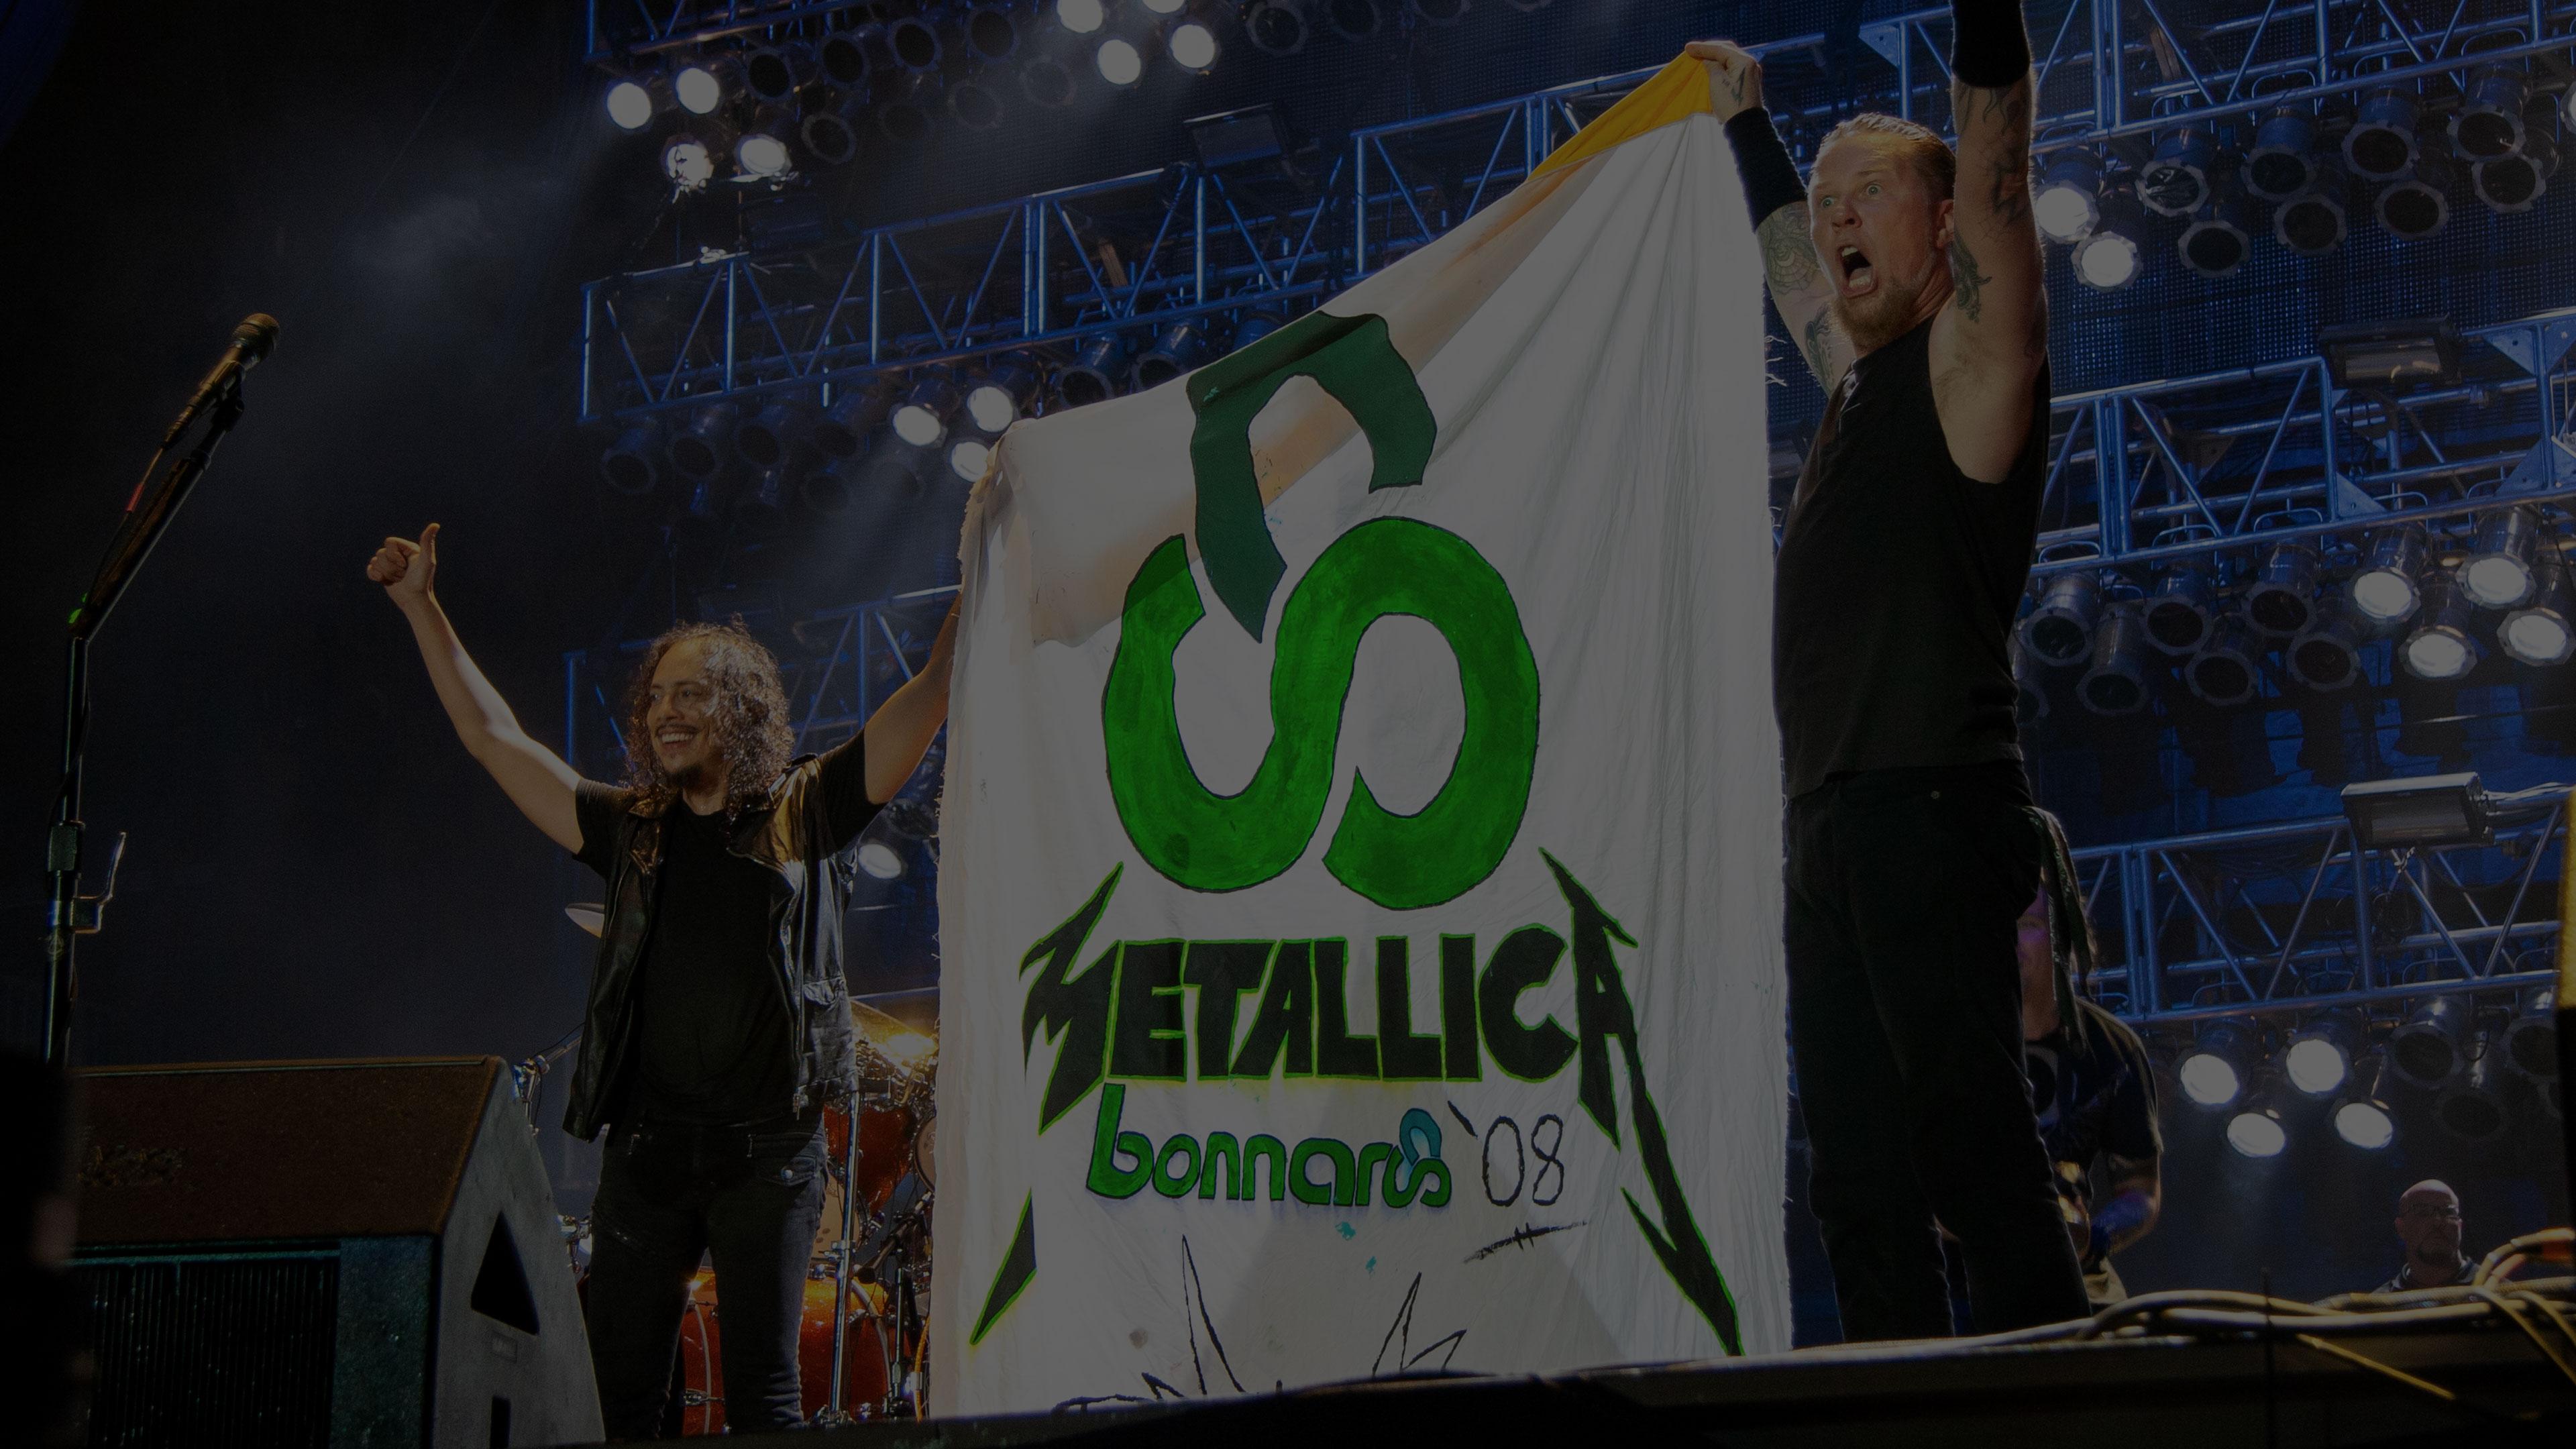 Metallica at Bonnaroo Music & Arts Festival at Great Stage Park in Manchester, TN on June 13, 2008